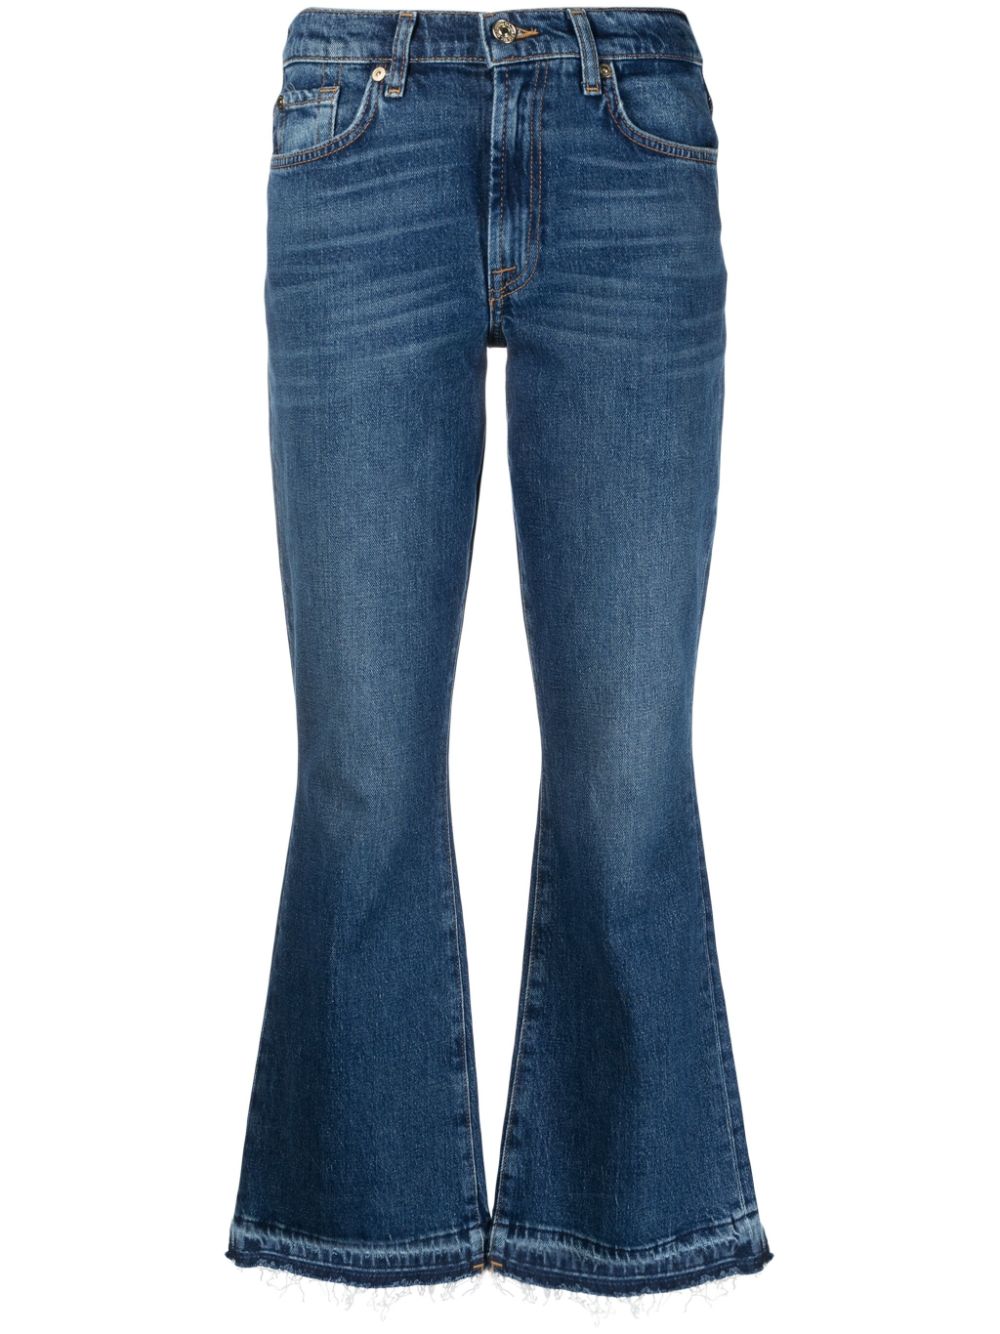 7 For All Mankind 7 FOR ALL MANKIND- Cropped Denim Jeans